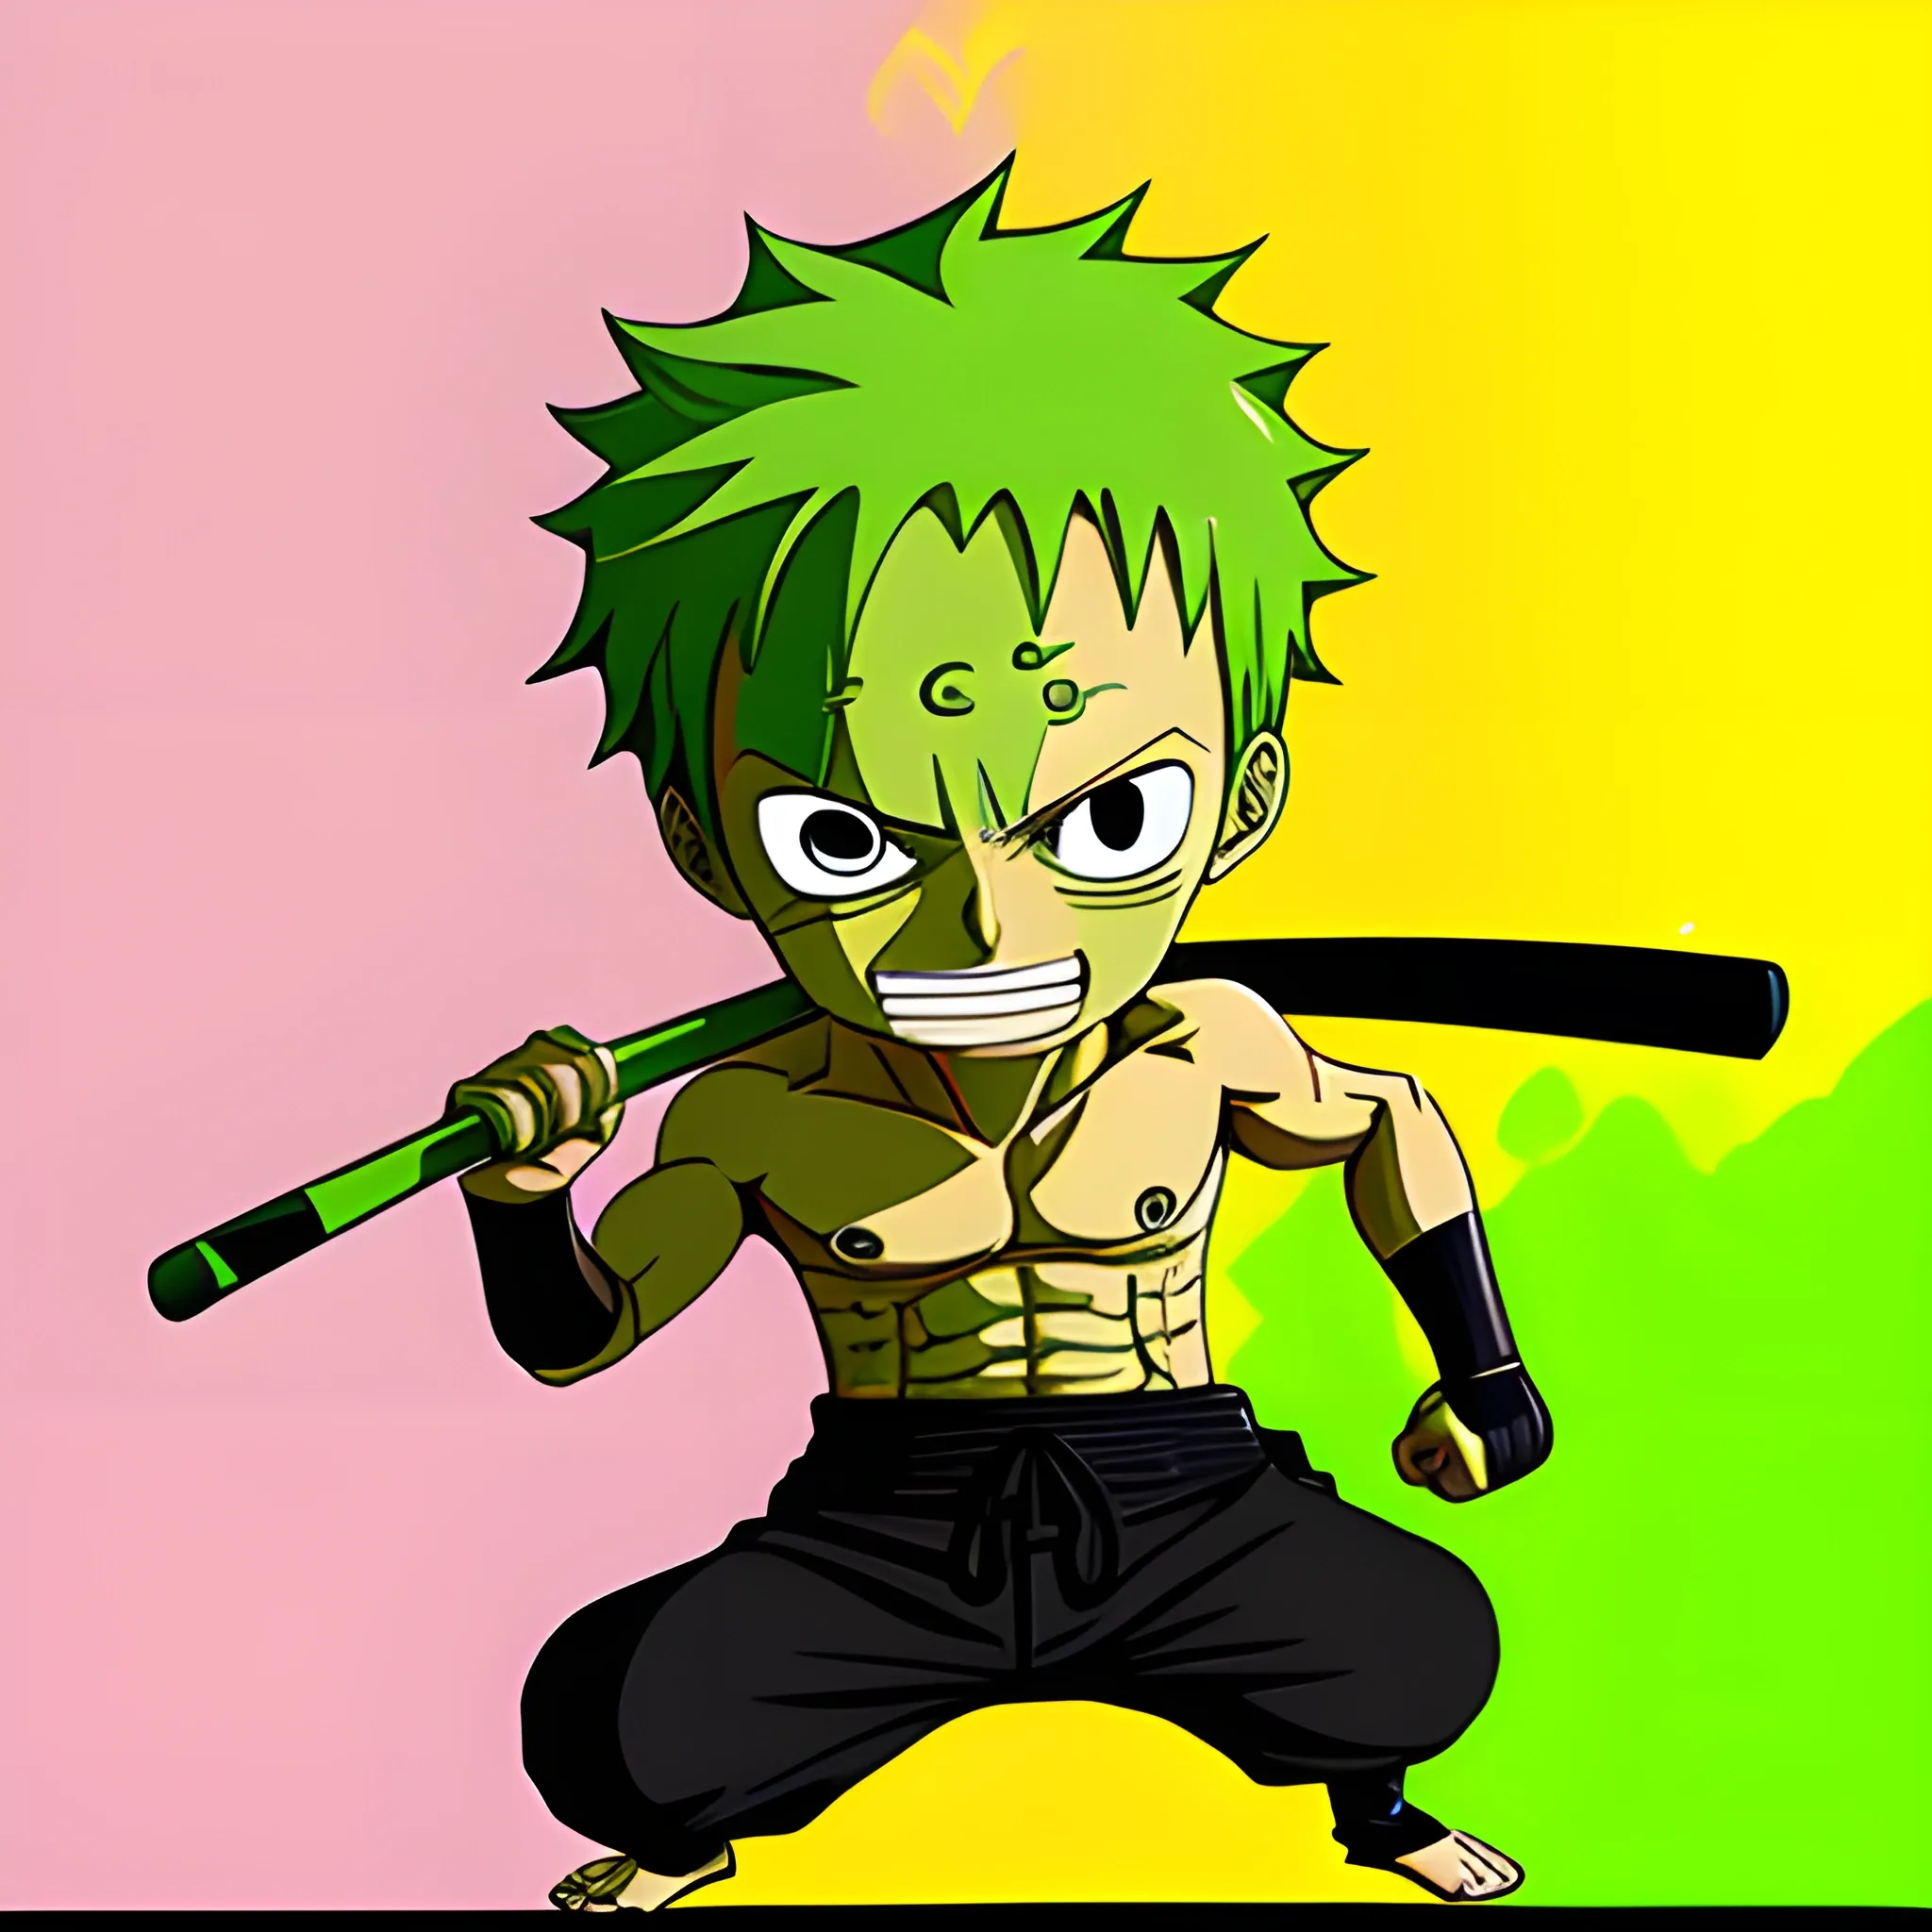 Digital art style, Zoro One Piece, Bright green colors, Vibrant color pallet, Anime style / Chibi, Fighting, full body